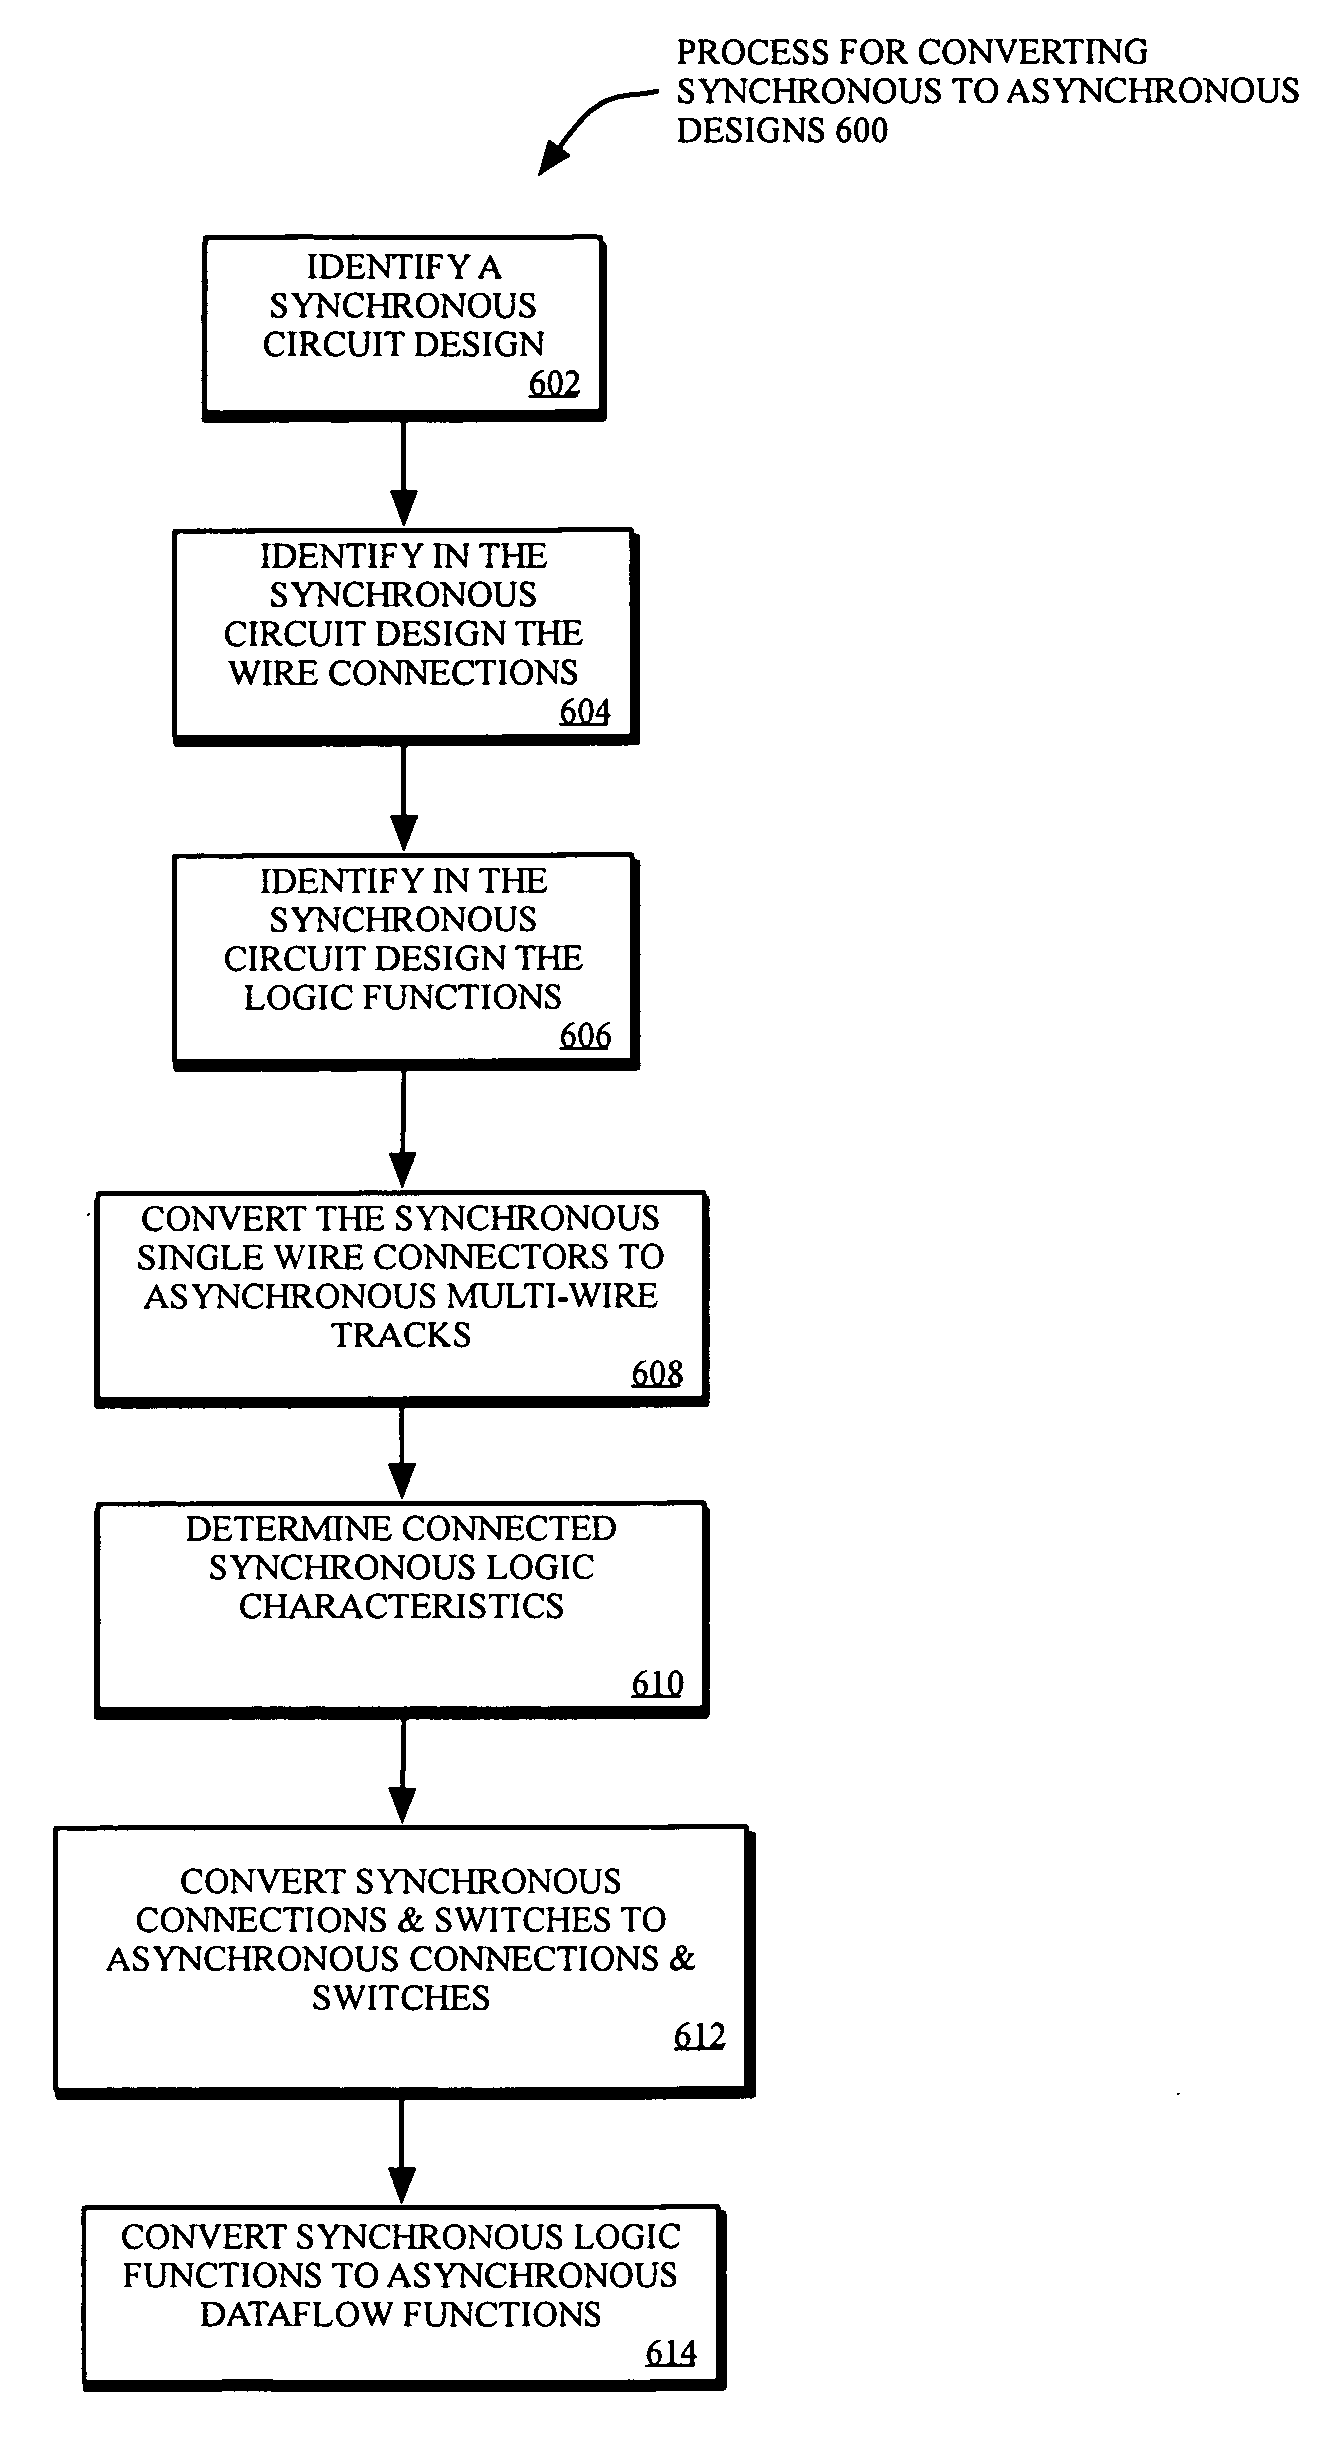 Methods and systems for converting a synchronous circuit fabric into an asynchronous dataflow circuit fabric